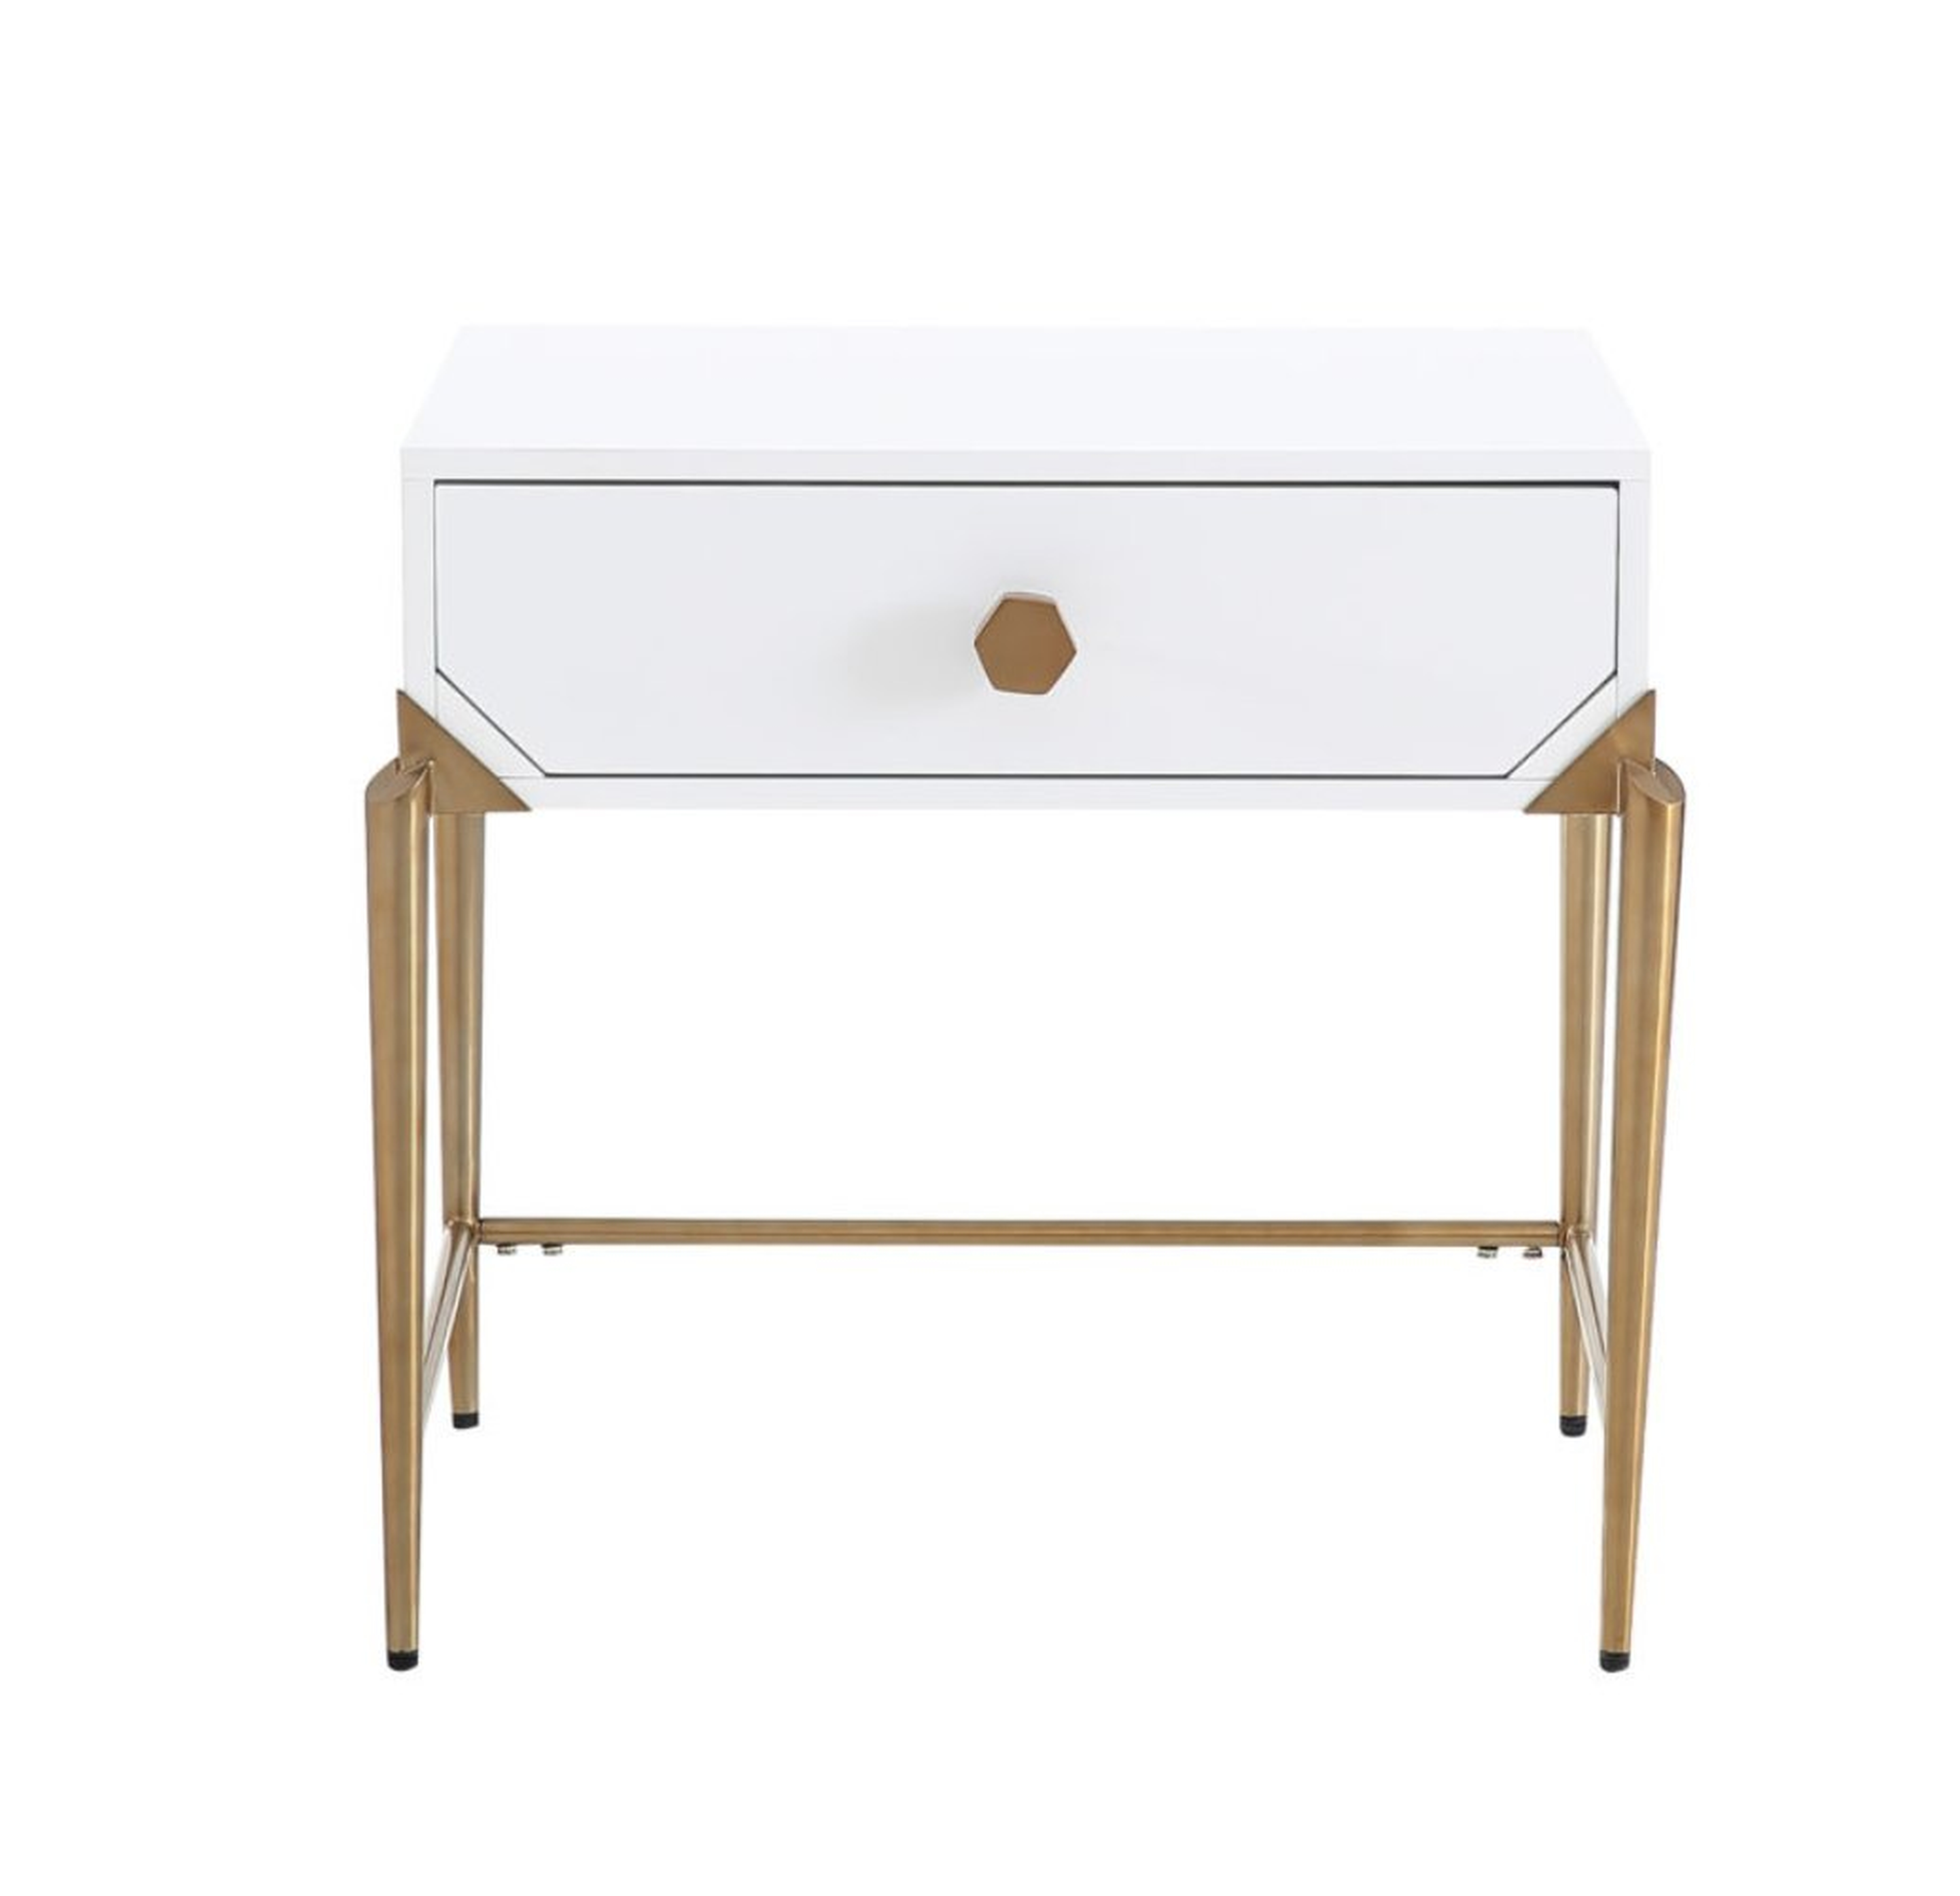 Camryn WHITE LACQUER SIDE TABLE - Maren Home